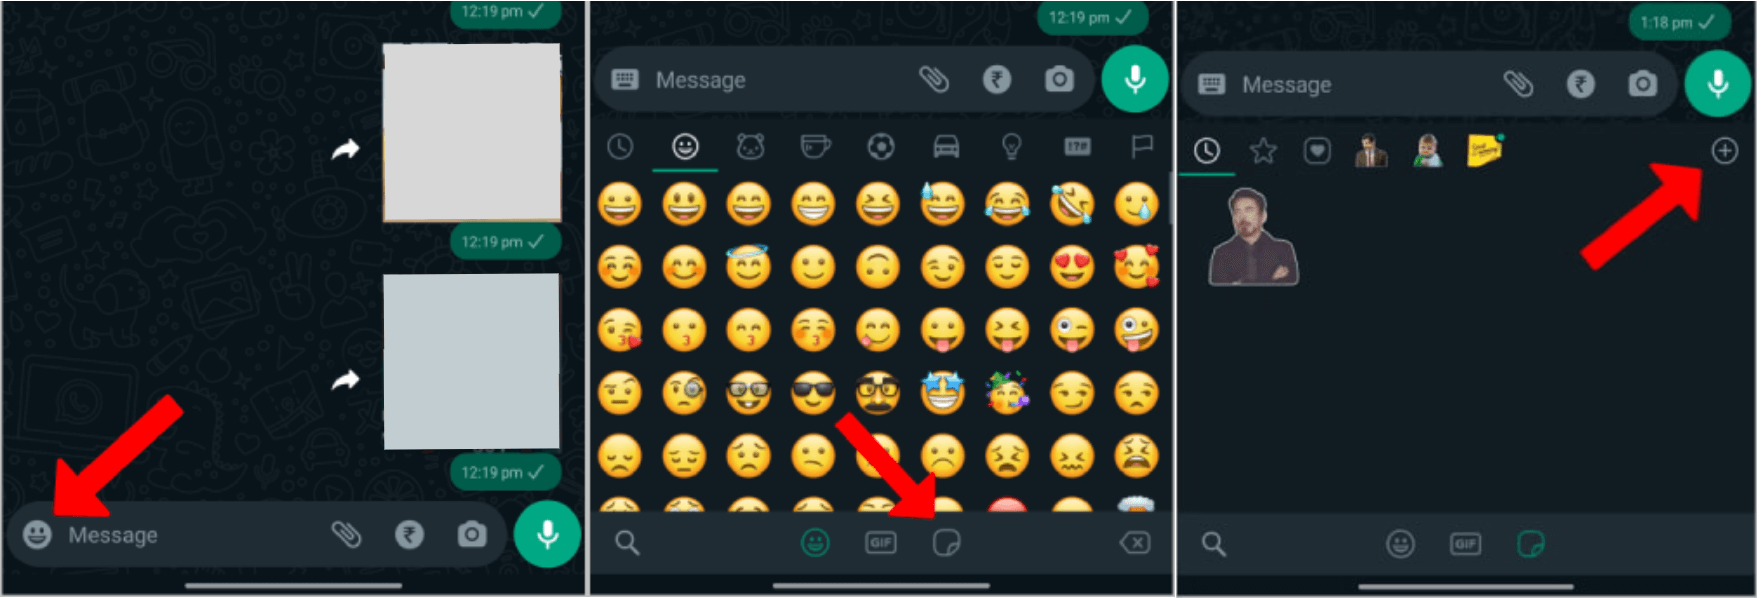 how to add stickers to whatsapp on android